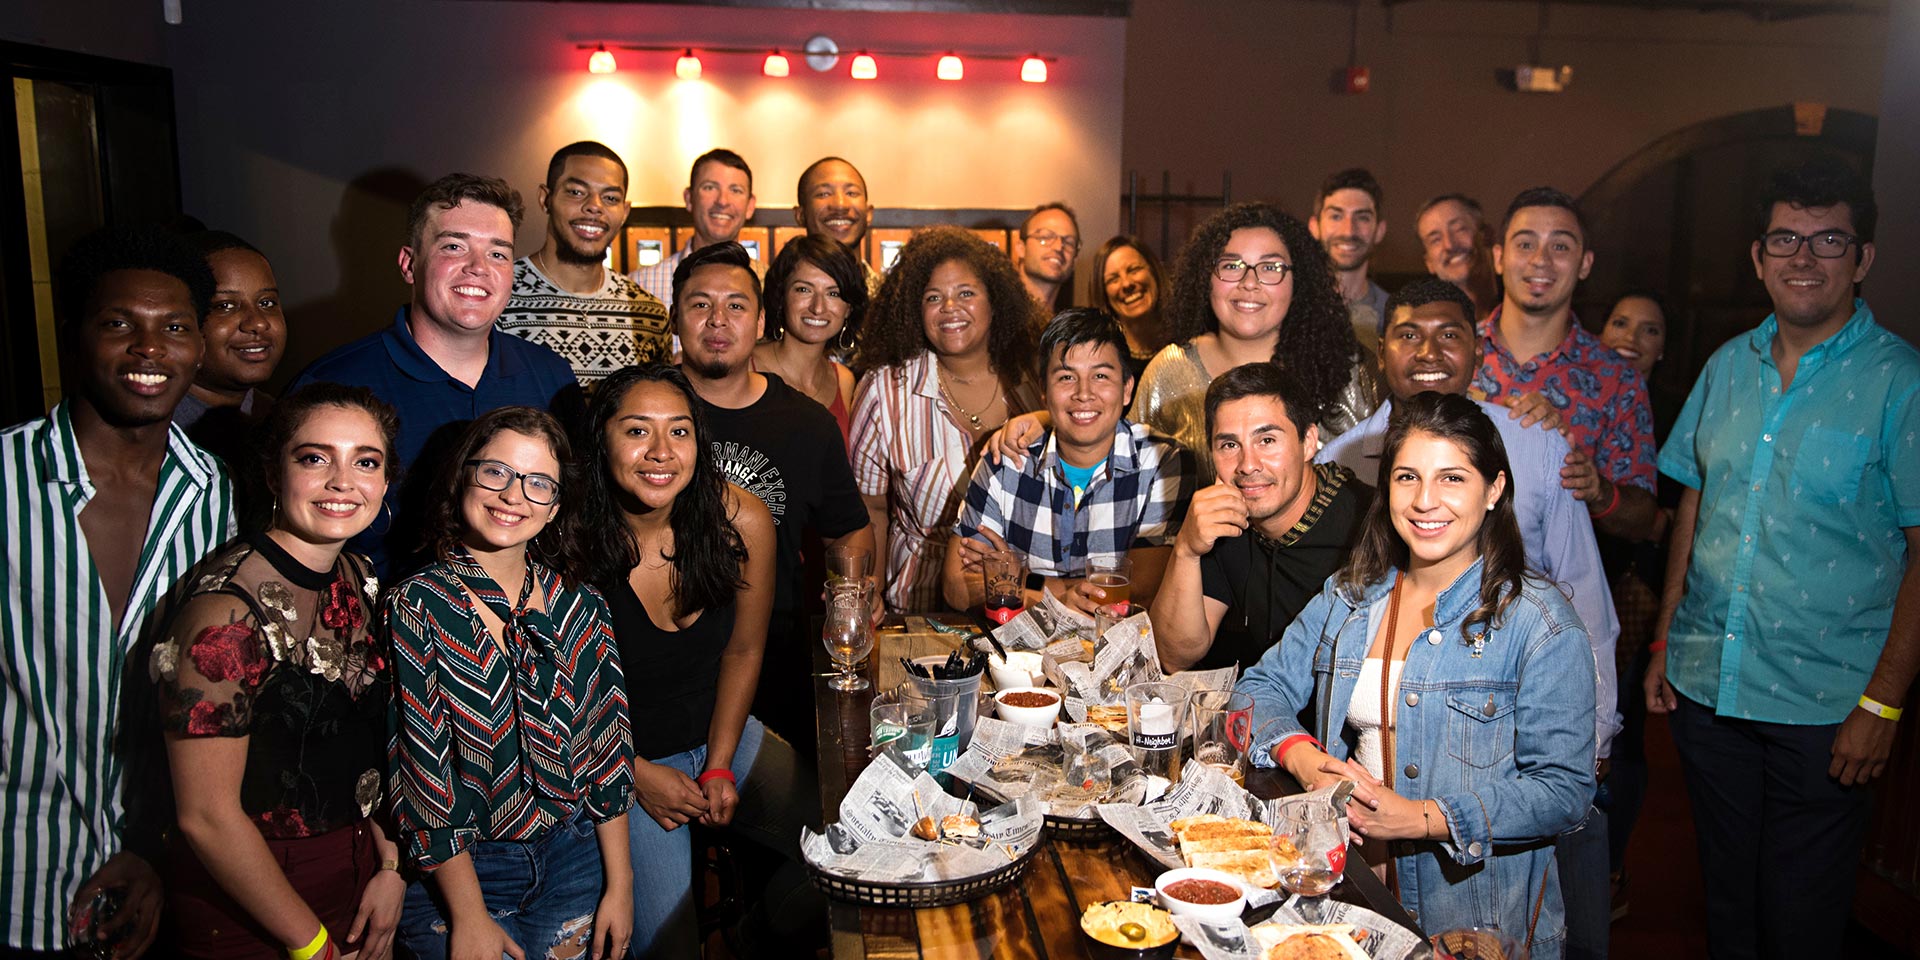 A group of people smile for the camera during a Hispanic Heritage month party